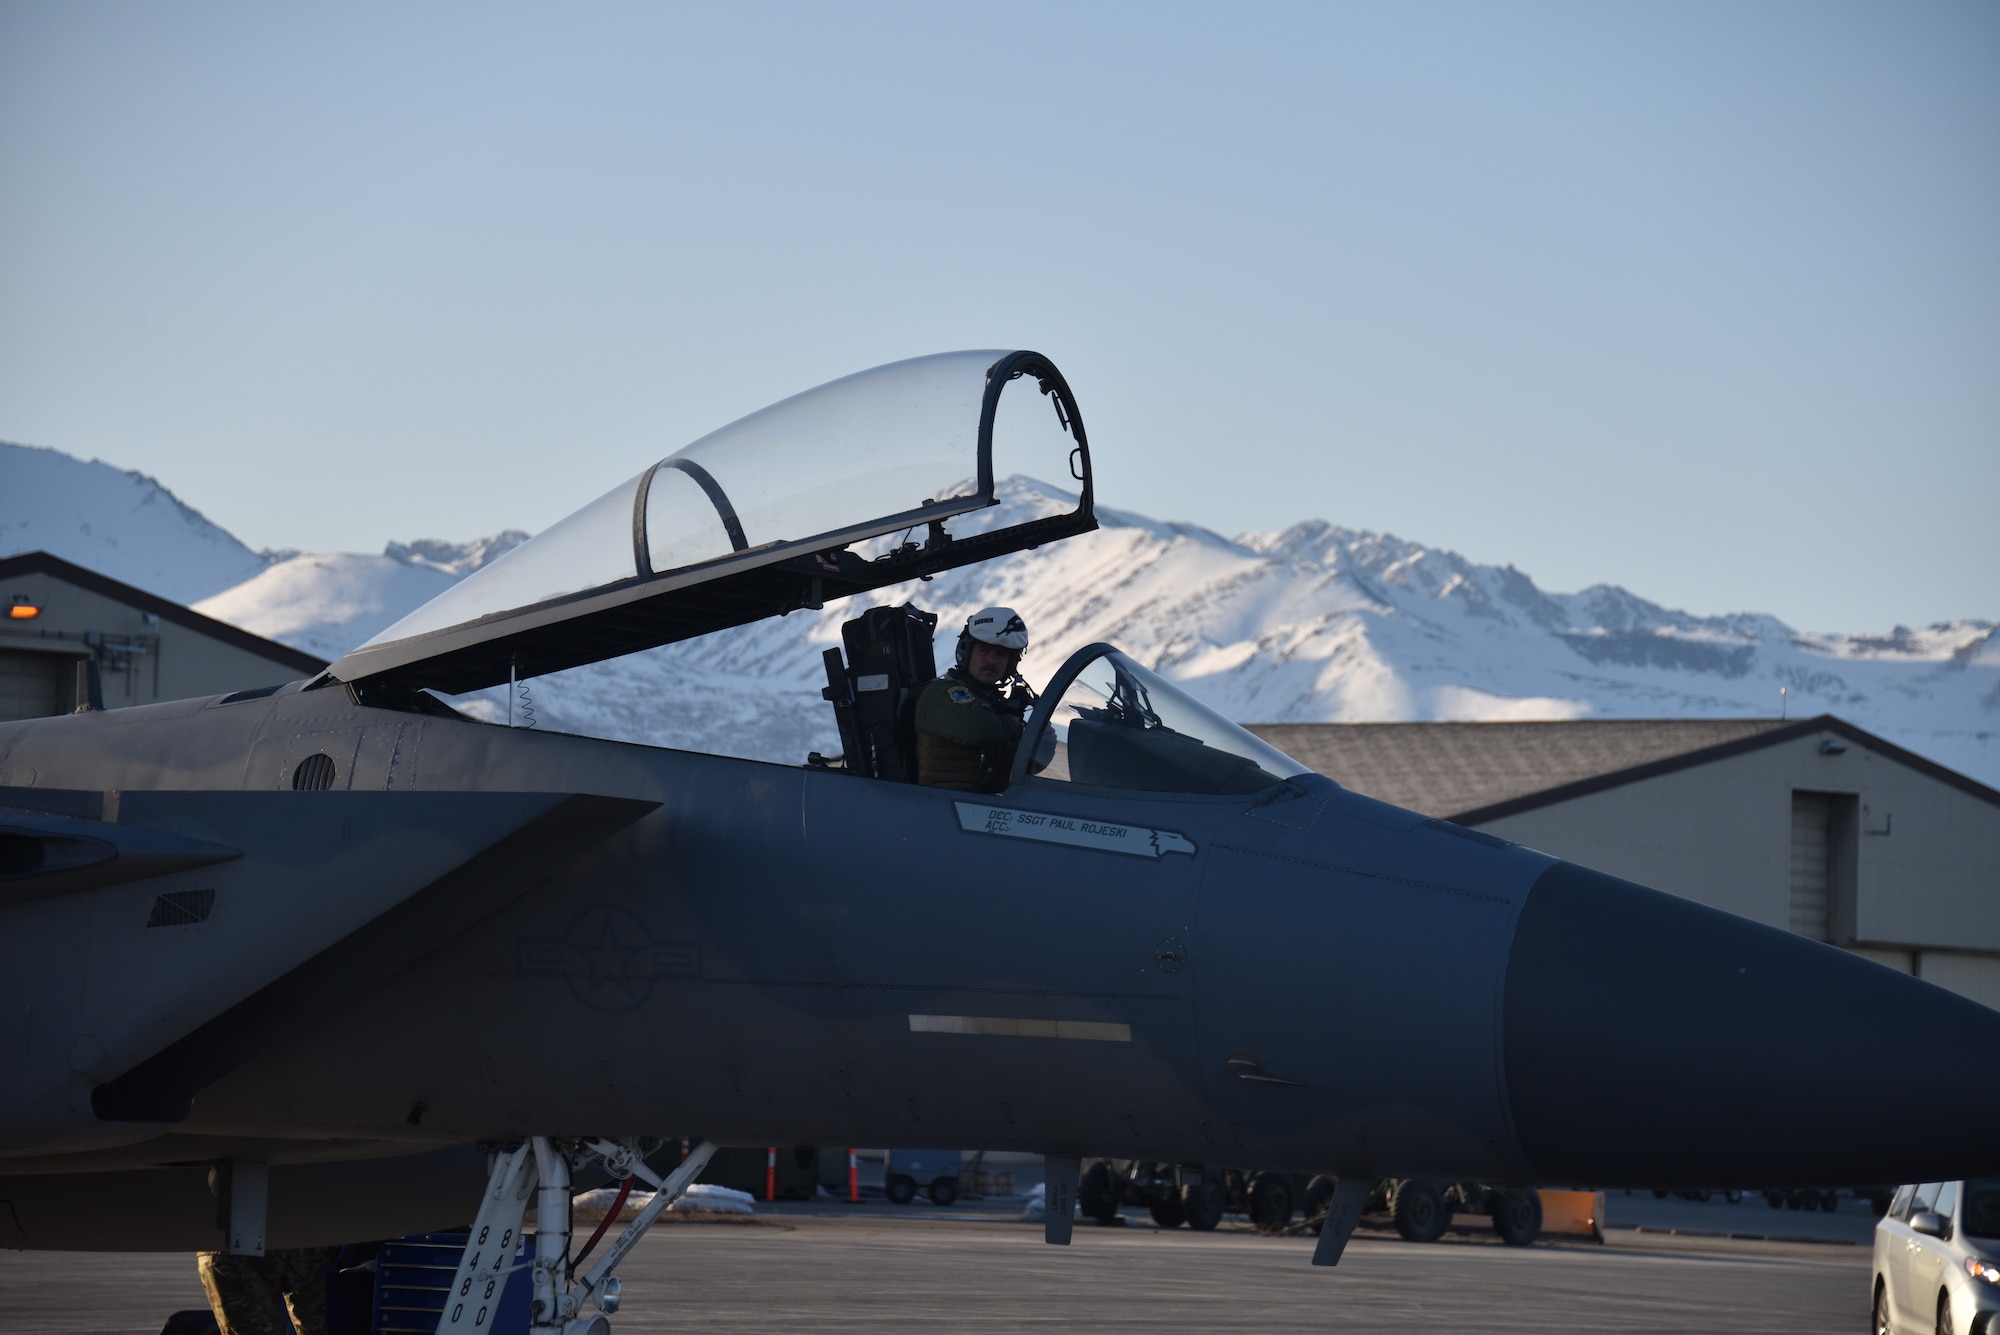 U.S. Air Force Capt. Ben Hale, a pilot assigned to the 194th Fighter Squadron, 144th Fighter Wing, prepares to launch an F-15C Eagle on the flightline of Joint Base Elmendorf-Richardson, Alaska, April 20, 2022, while conducting dissimilar air combat training with the 3rd Wing’s F-22 Raptors.